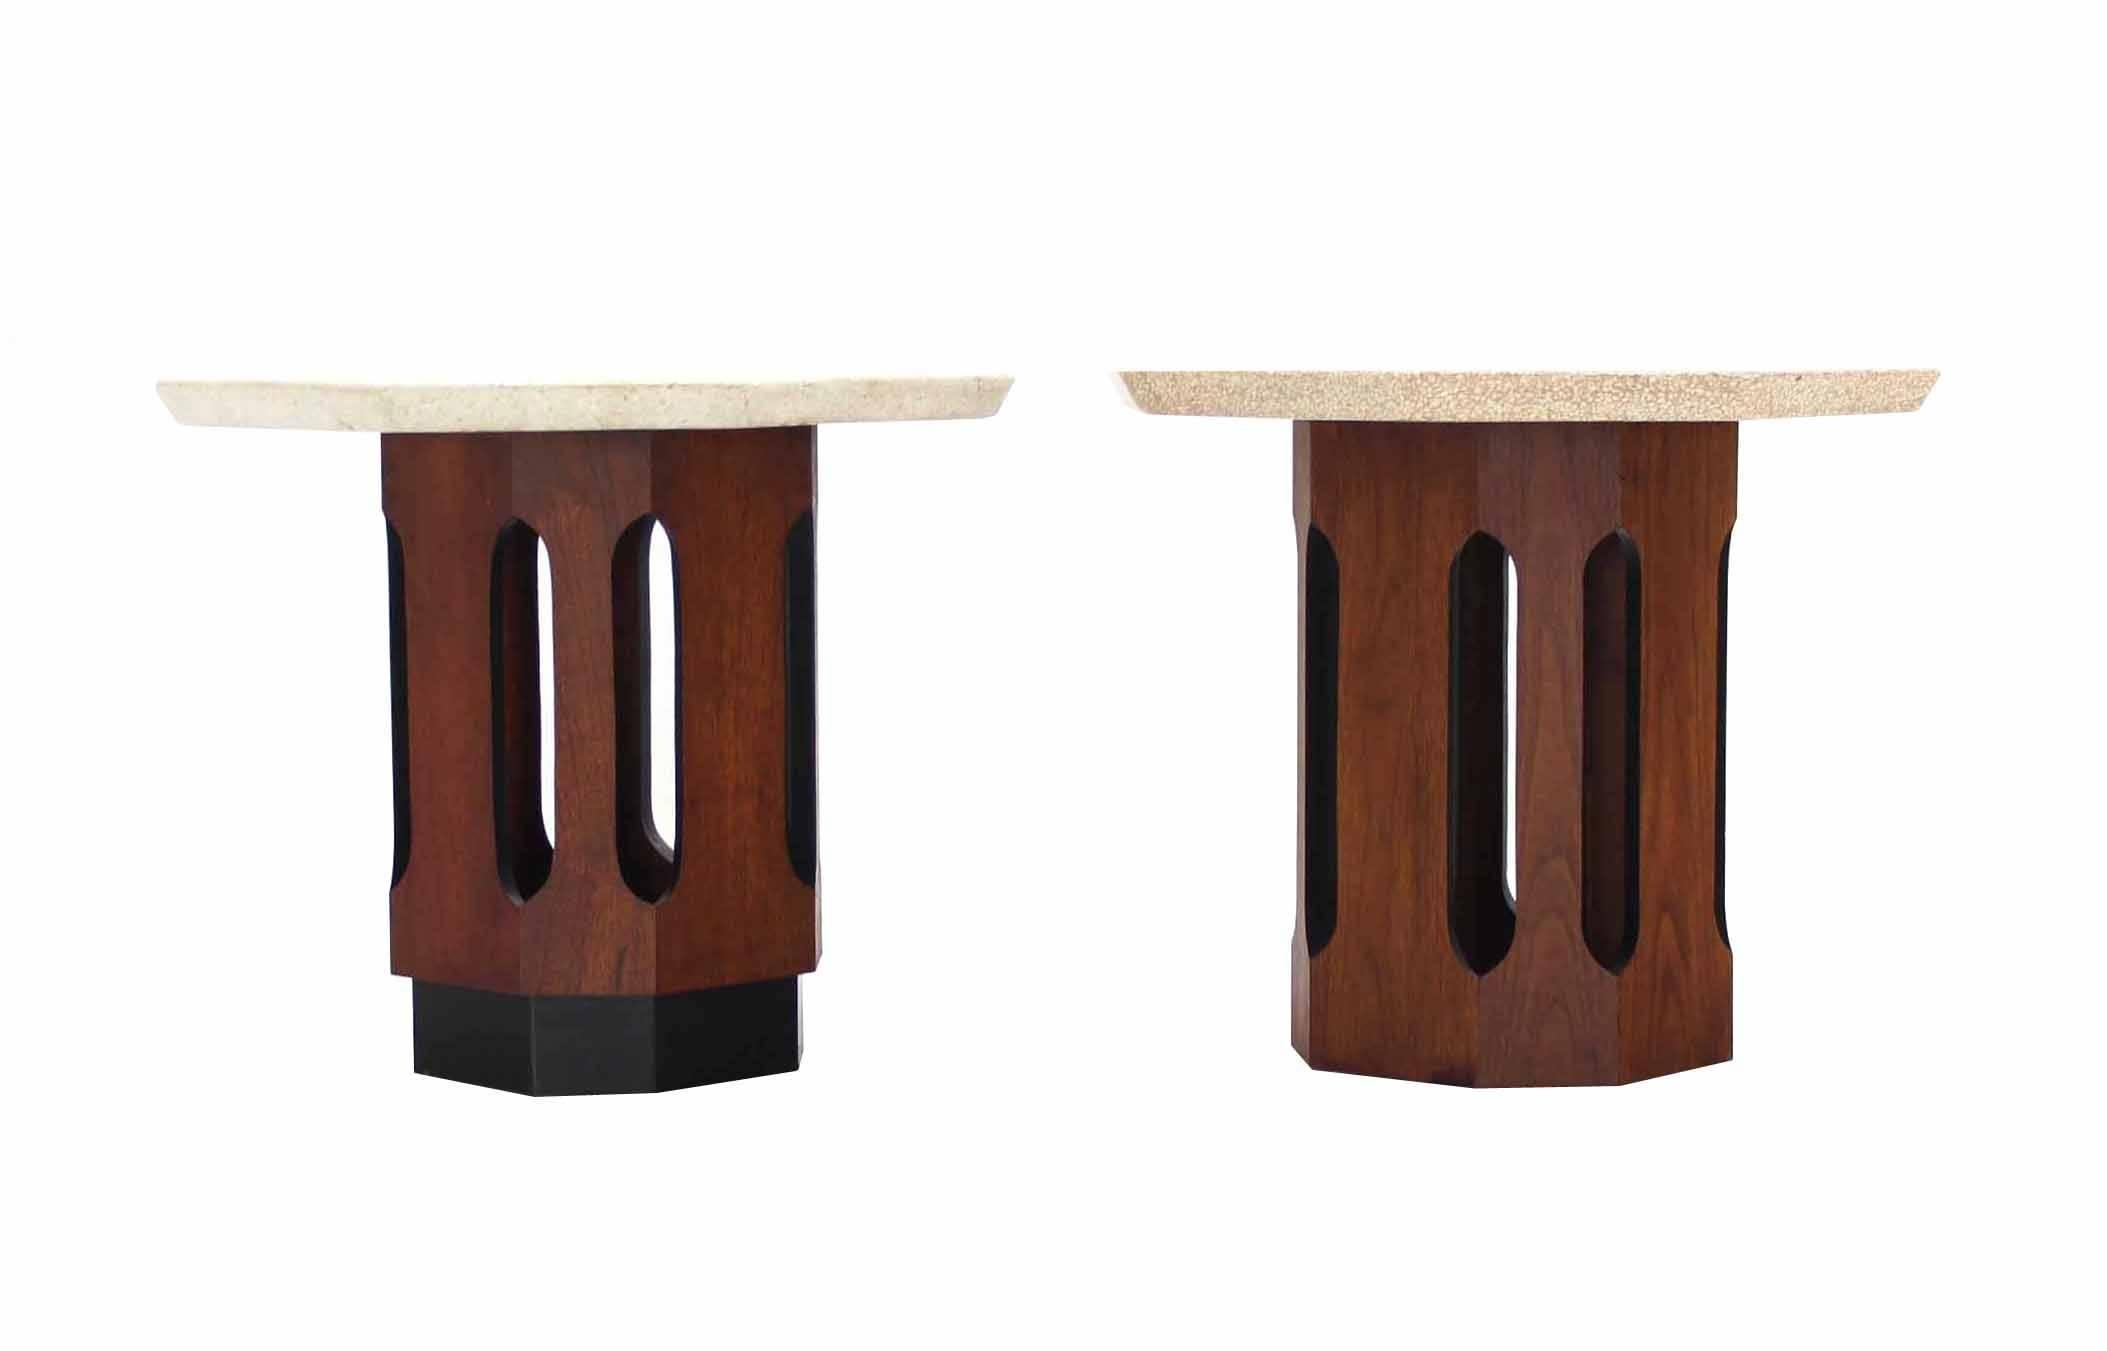 Good quality vintage end tables on walnut bases. Thick travertine terrazzo tops with mosaic inlays. These are non matching bases. One of the bases has a subbase please see the pictures.